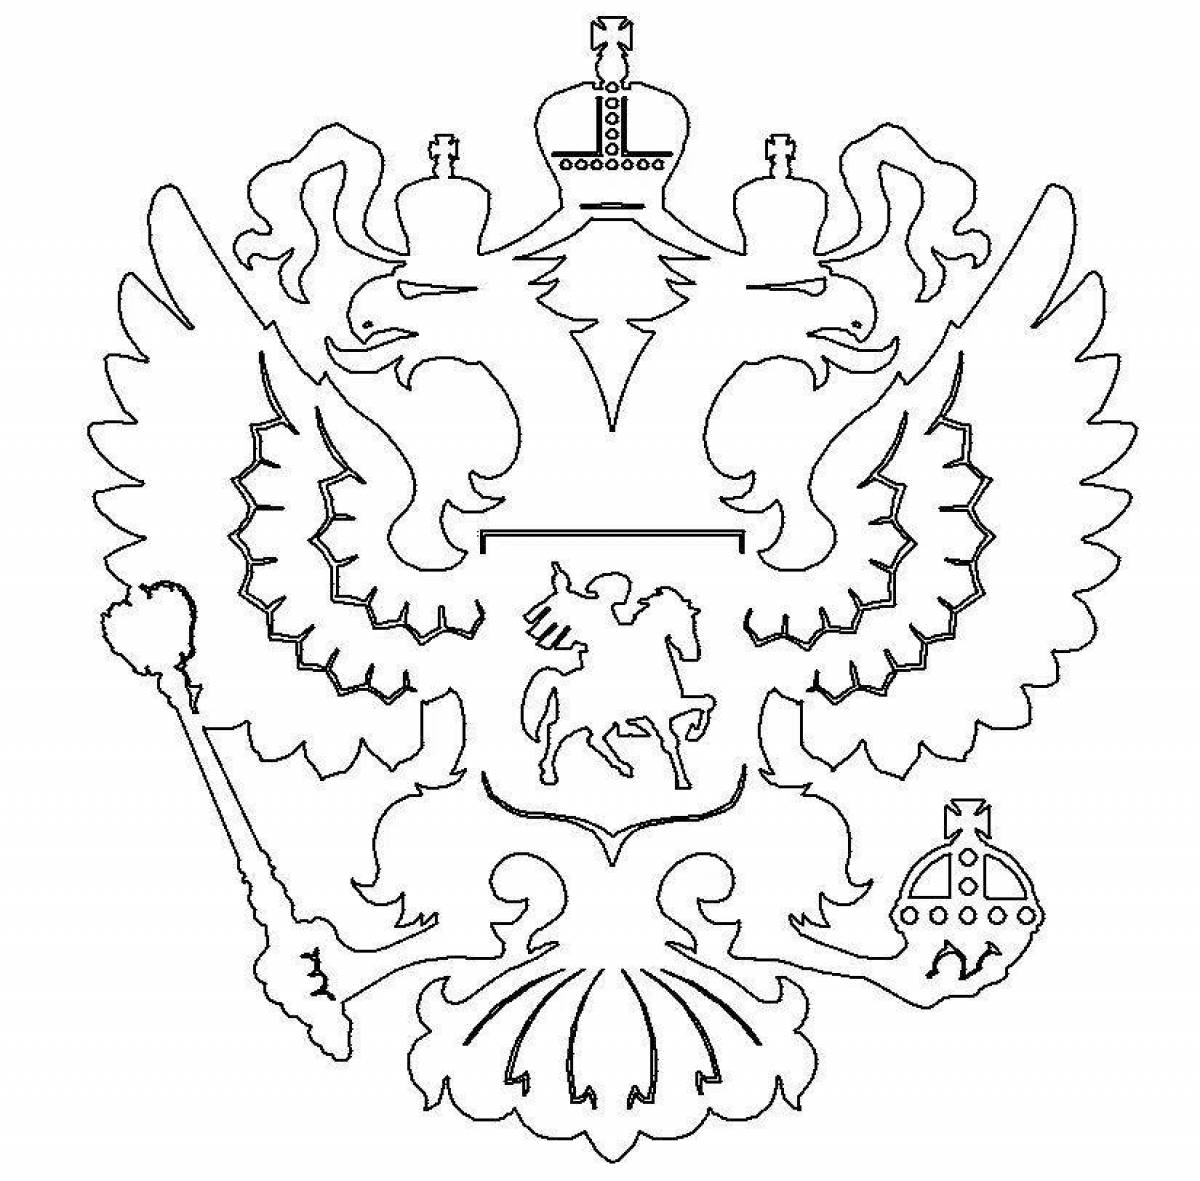 Coat of arms of the Russian Federation #8